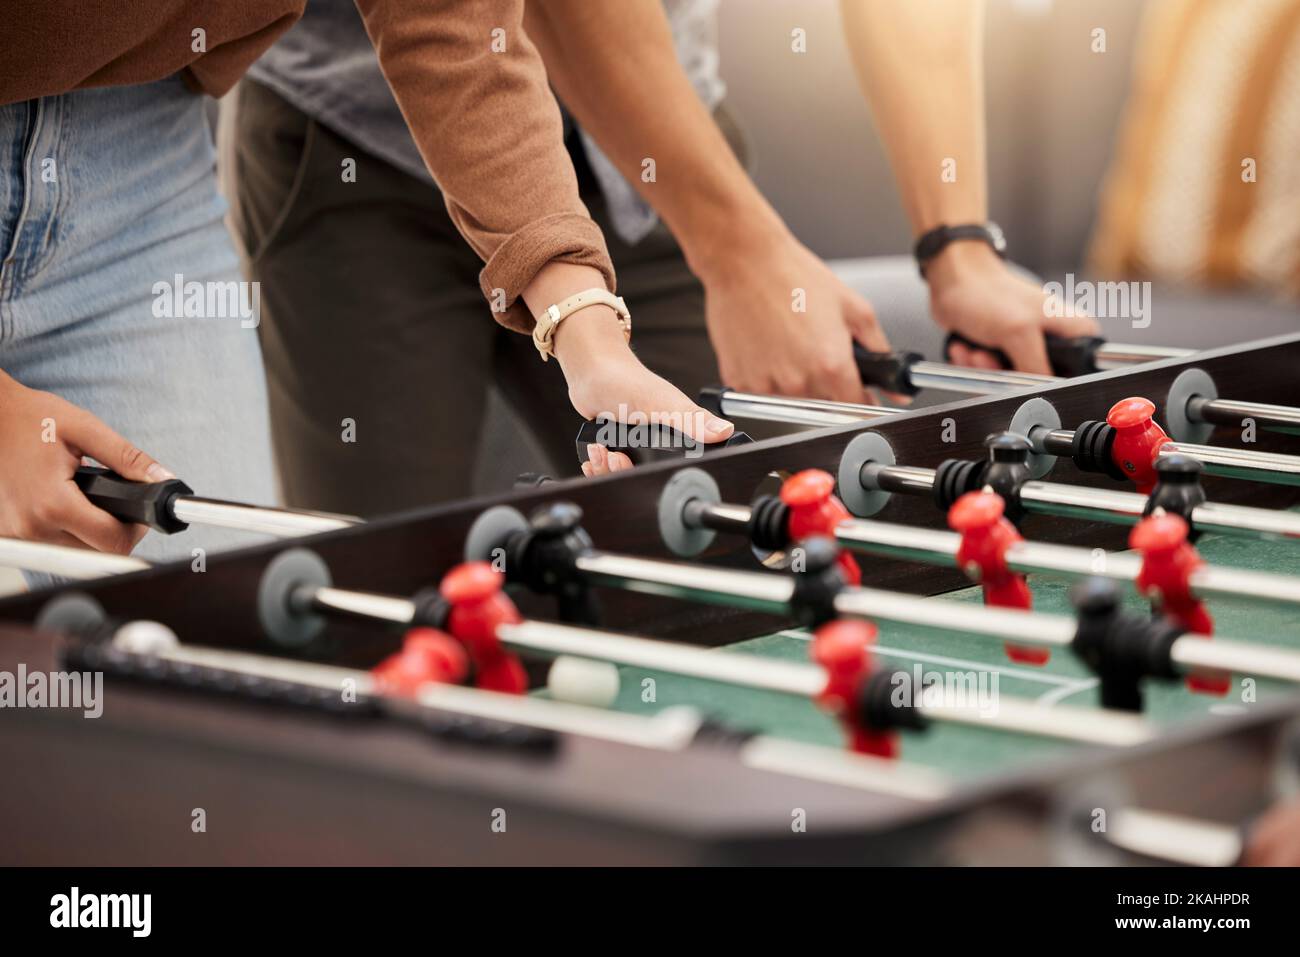 Hands, foosball and table with friends playing a game together indoors for fun or recreation. Football, fun and leisure with a friend group together Stock Photo